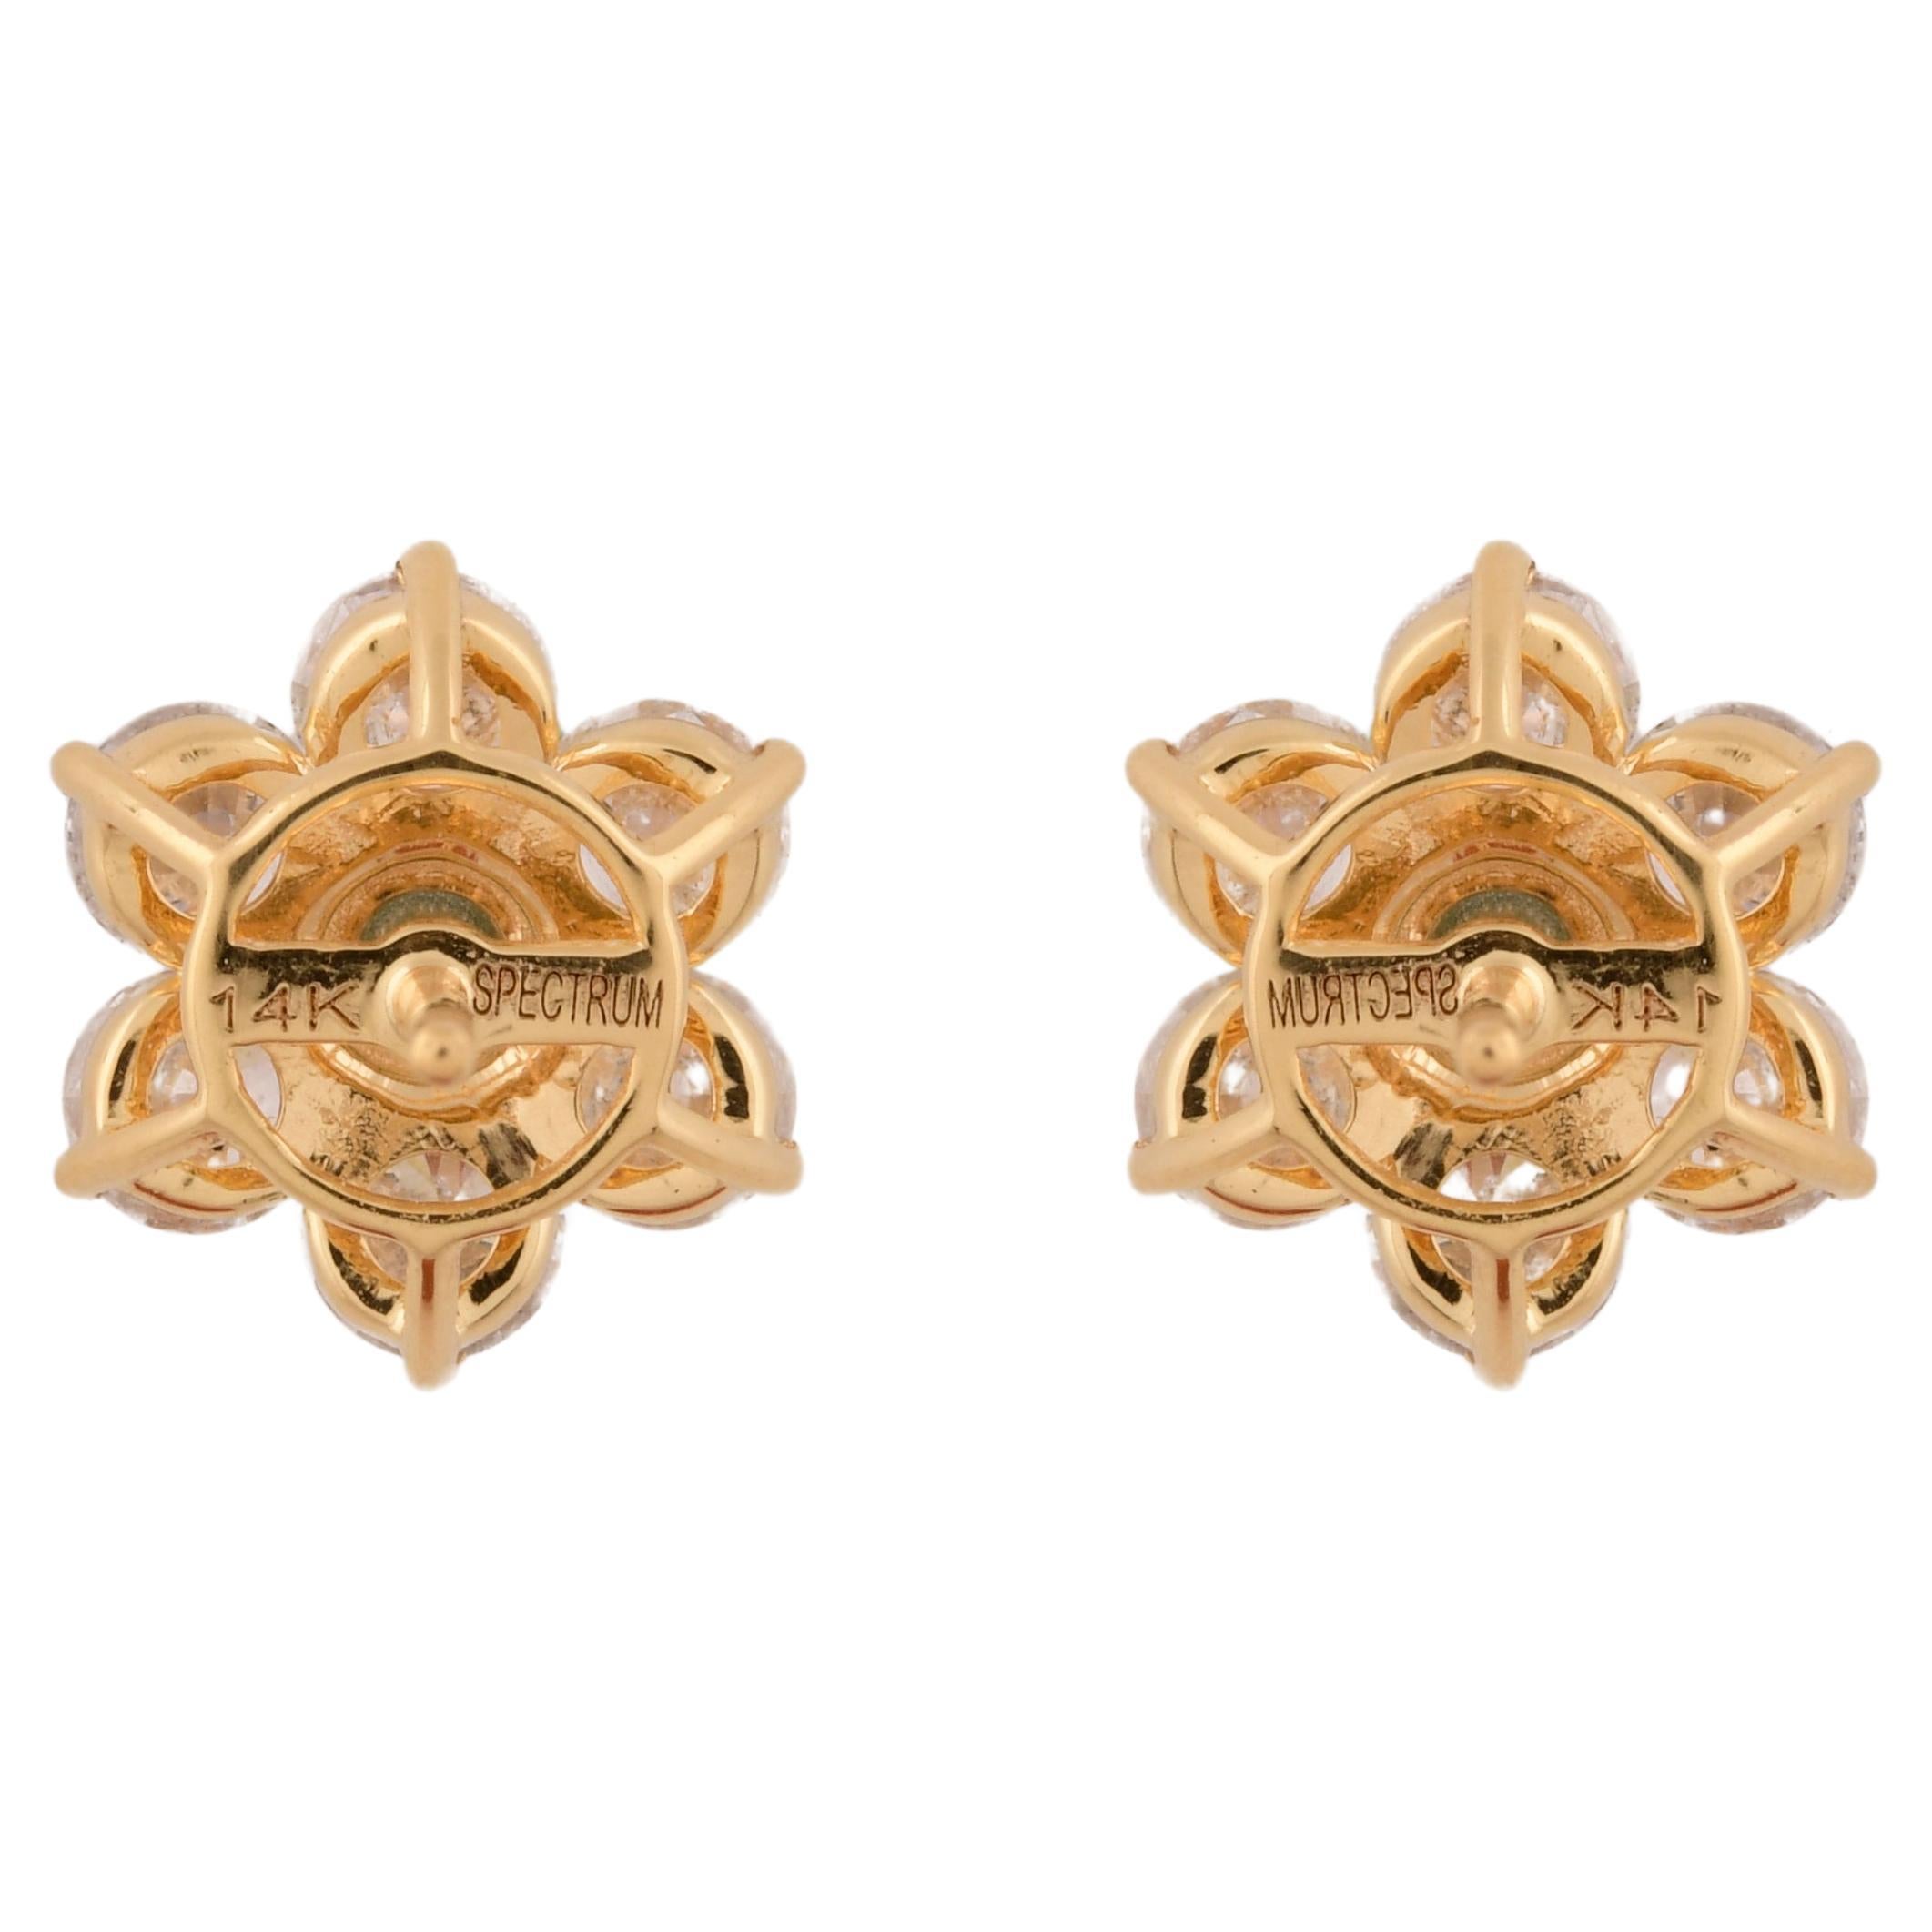 These stud earrings are designed to adorn your ears with effortless beauty and grace, making them the perfect accessory for any occasion. Whether worn for a special event or as a chic complement to your everyday attire, they are sure to make a